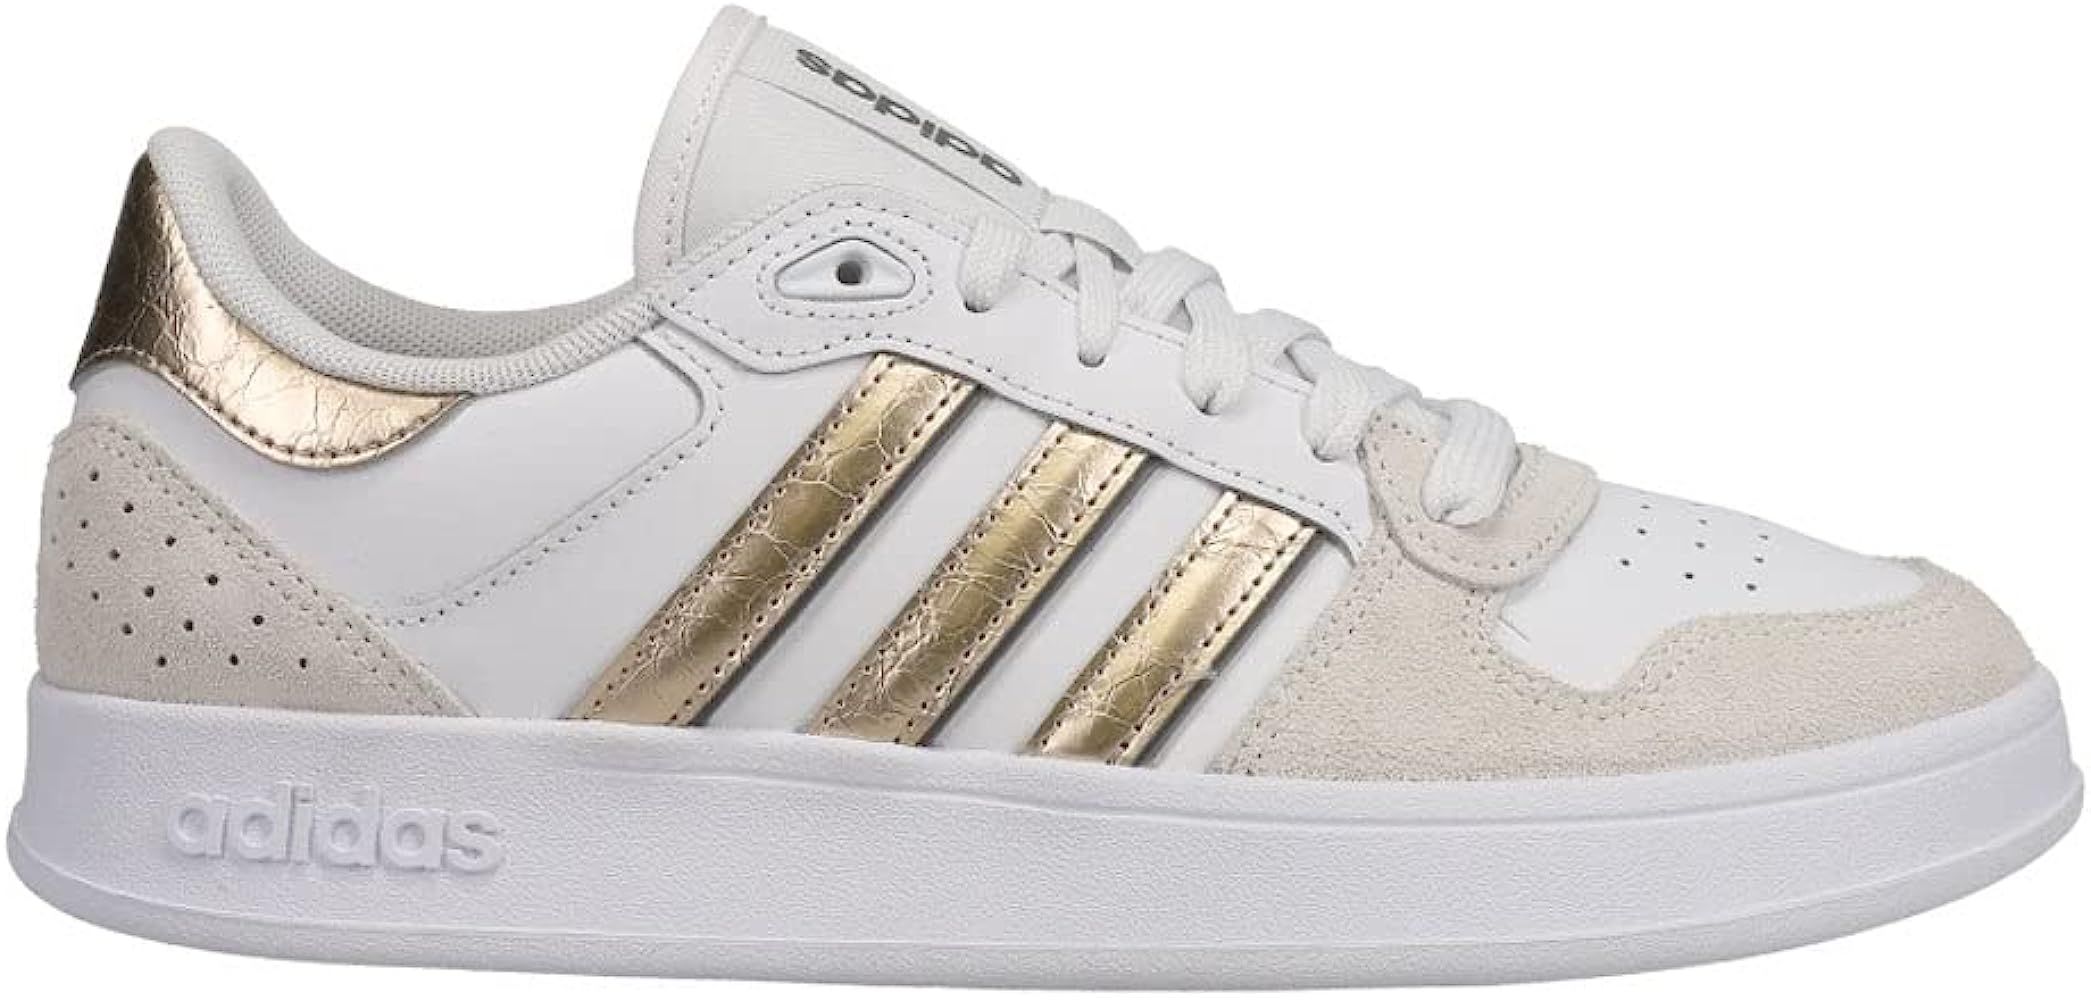 adidas Womens Breaknet Plus Sneakers Shoes Casual - Brown,White | Amazon (US)